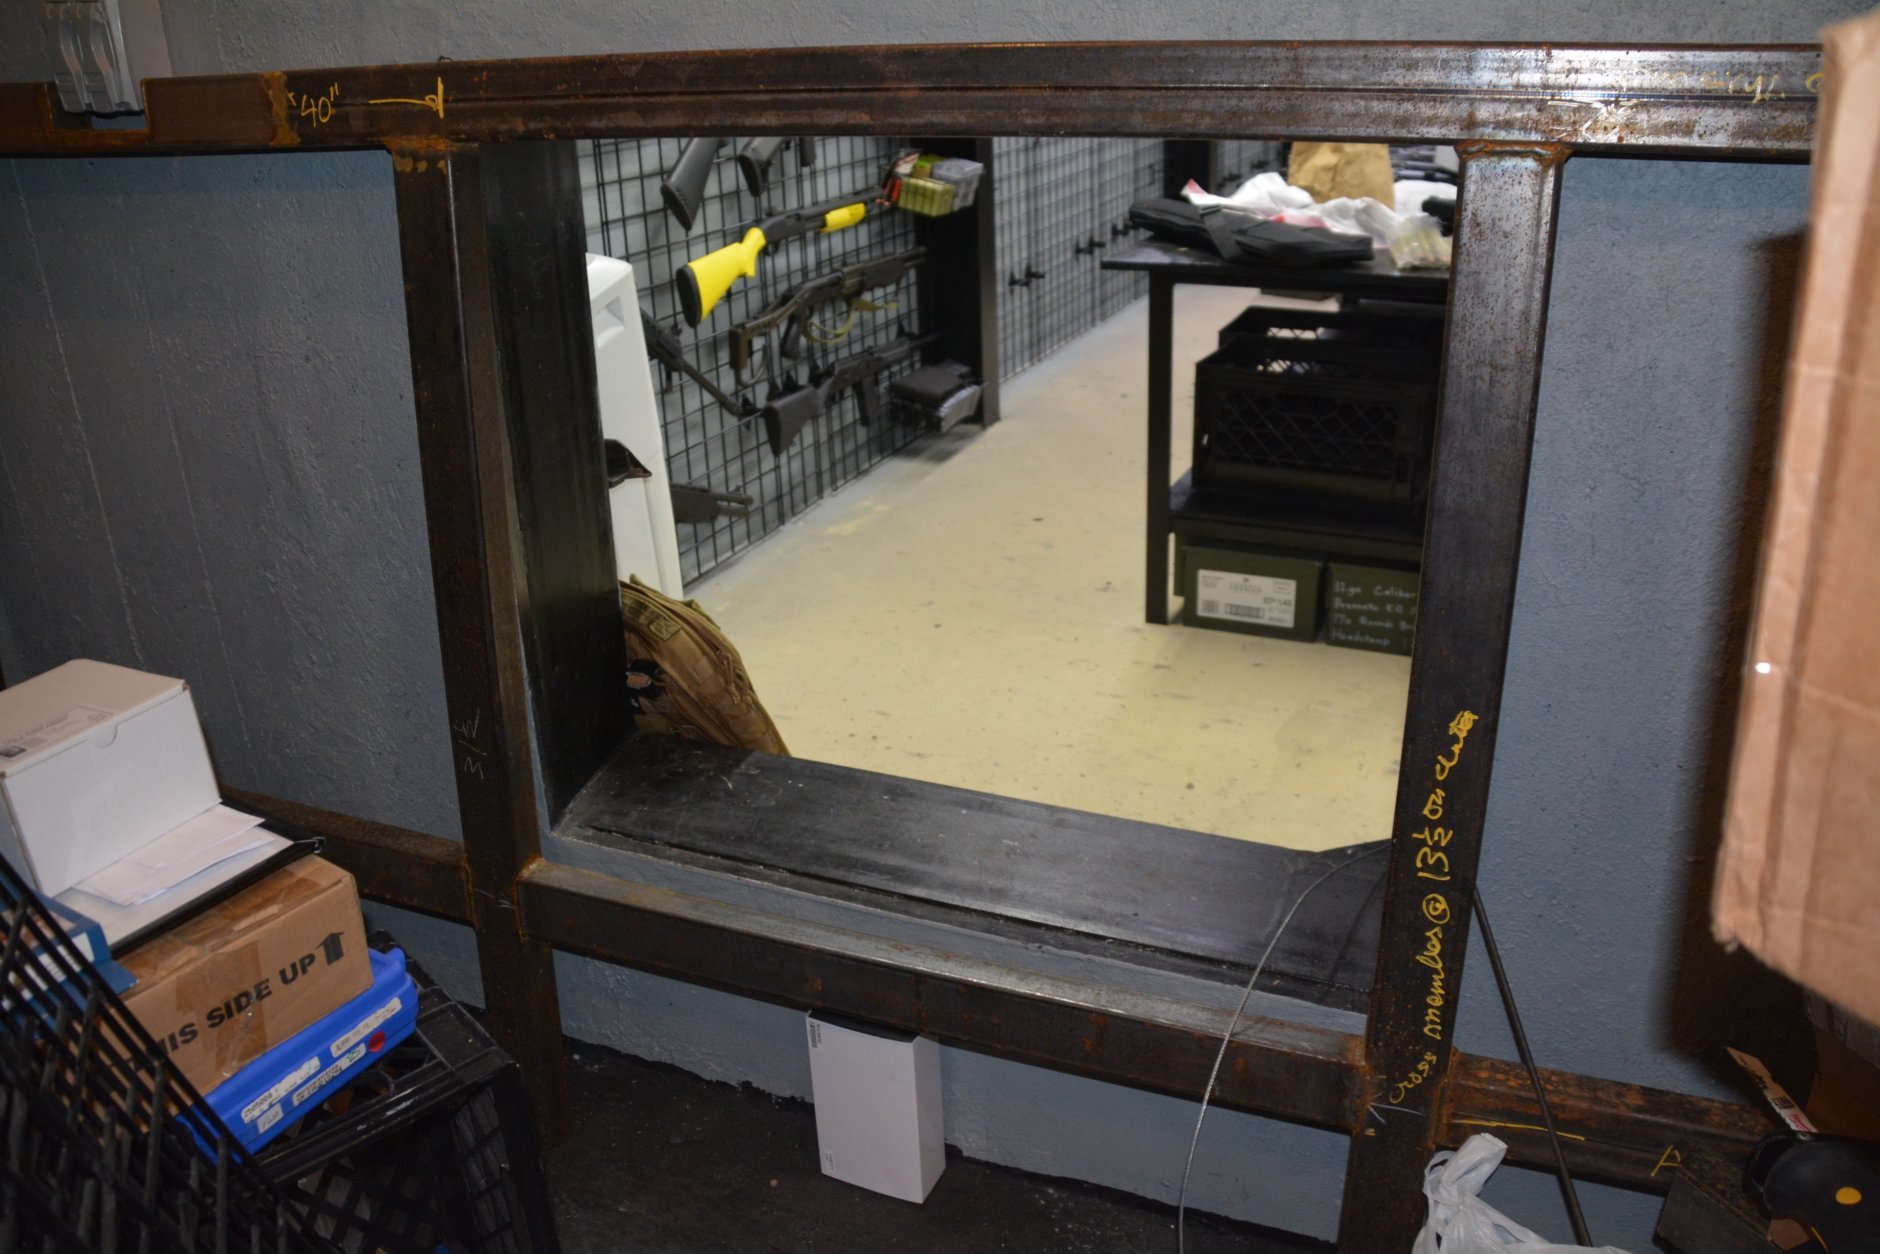 The view through the door into Bailey's bunker. (Photo courtesy of U.S. Attorney's Office)